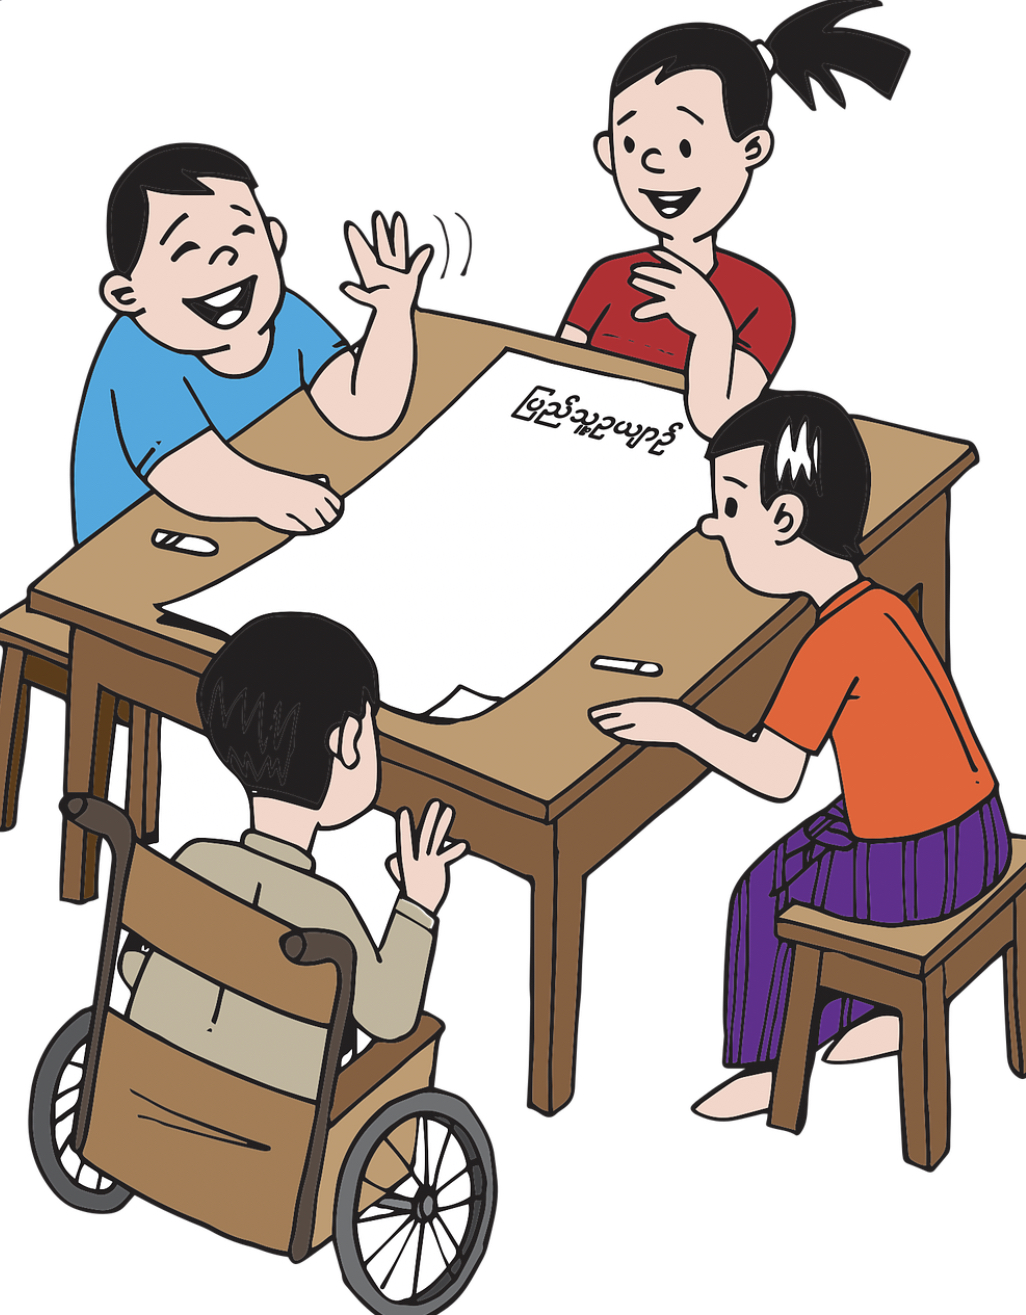 4 children around the table, one of them in a wheelchair.